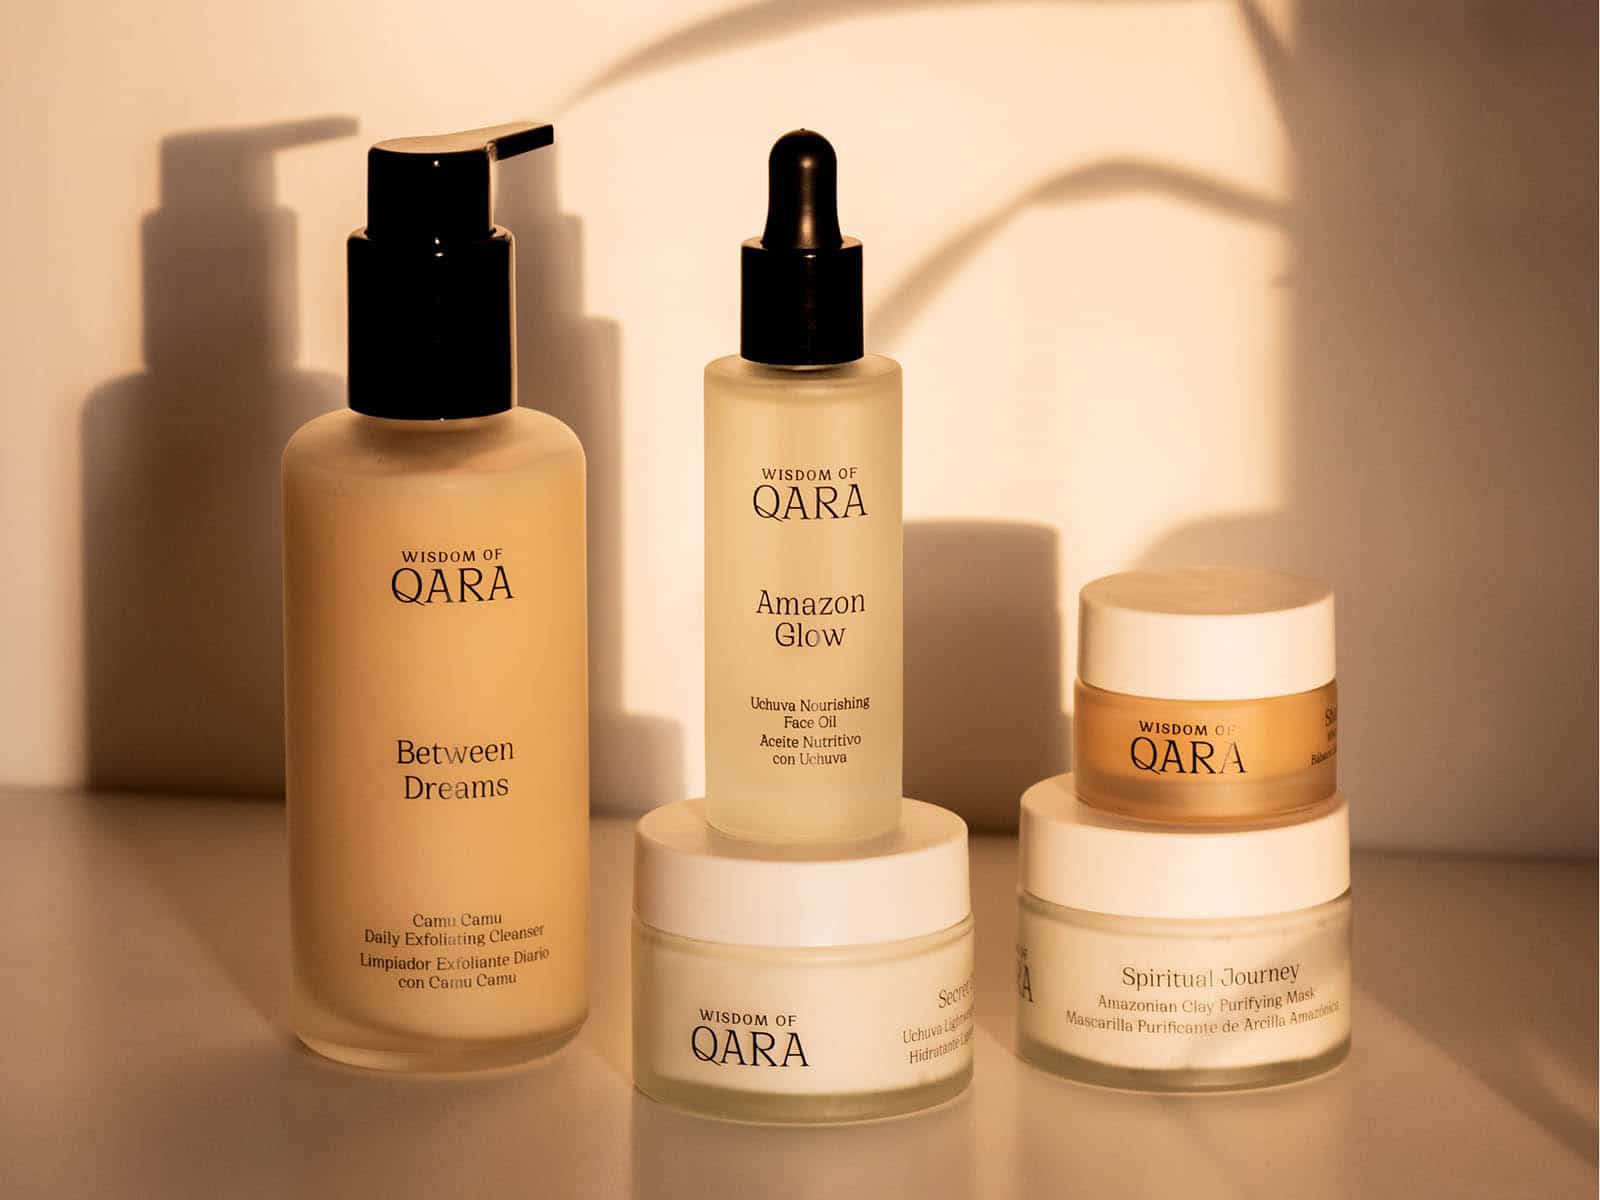 WISDOM OF QARA: the vegan beauty brand you need to know about